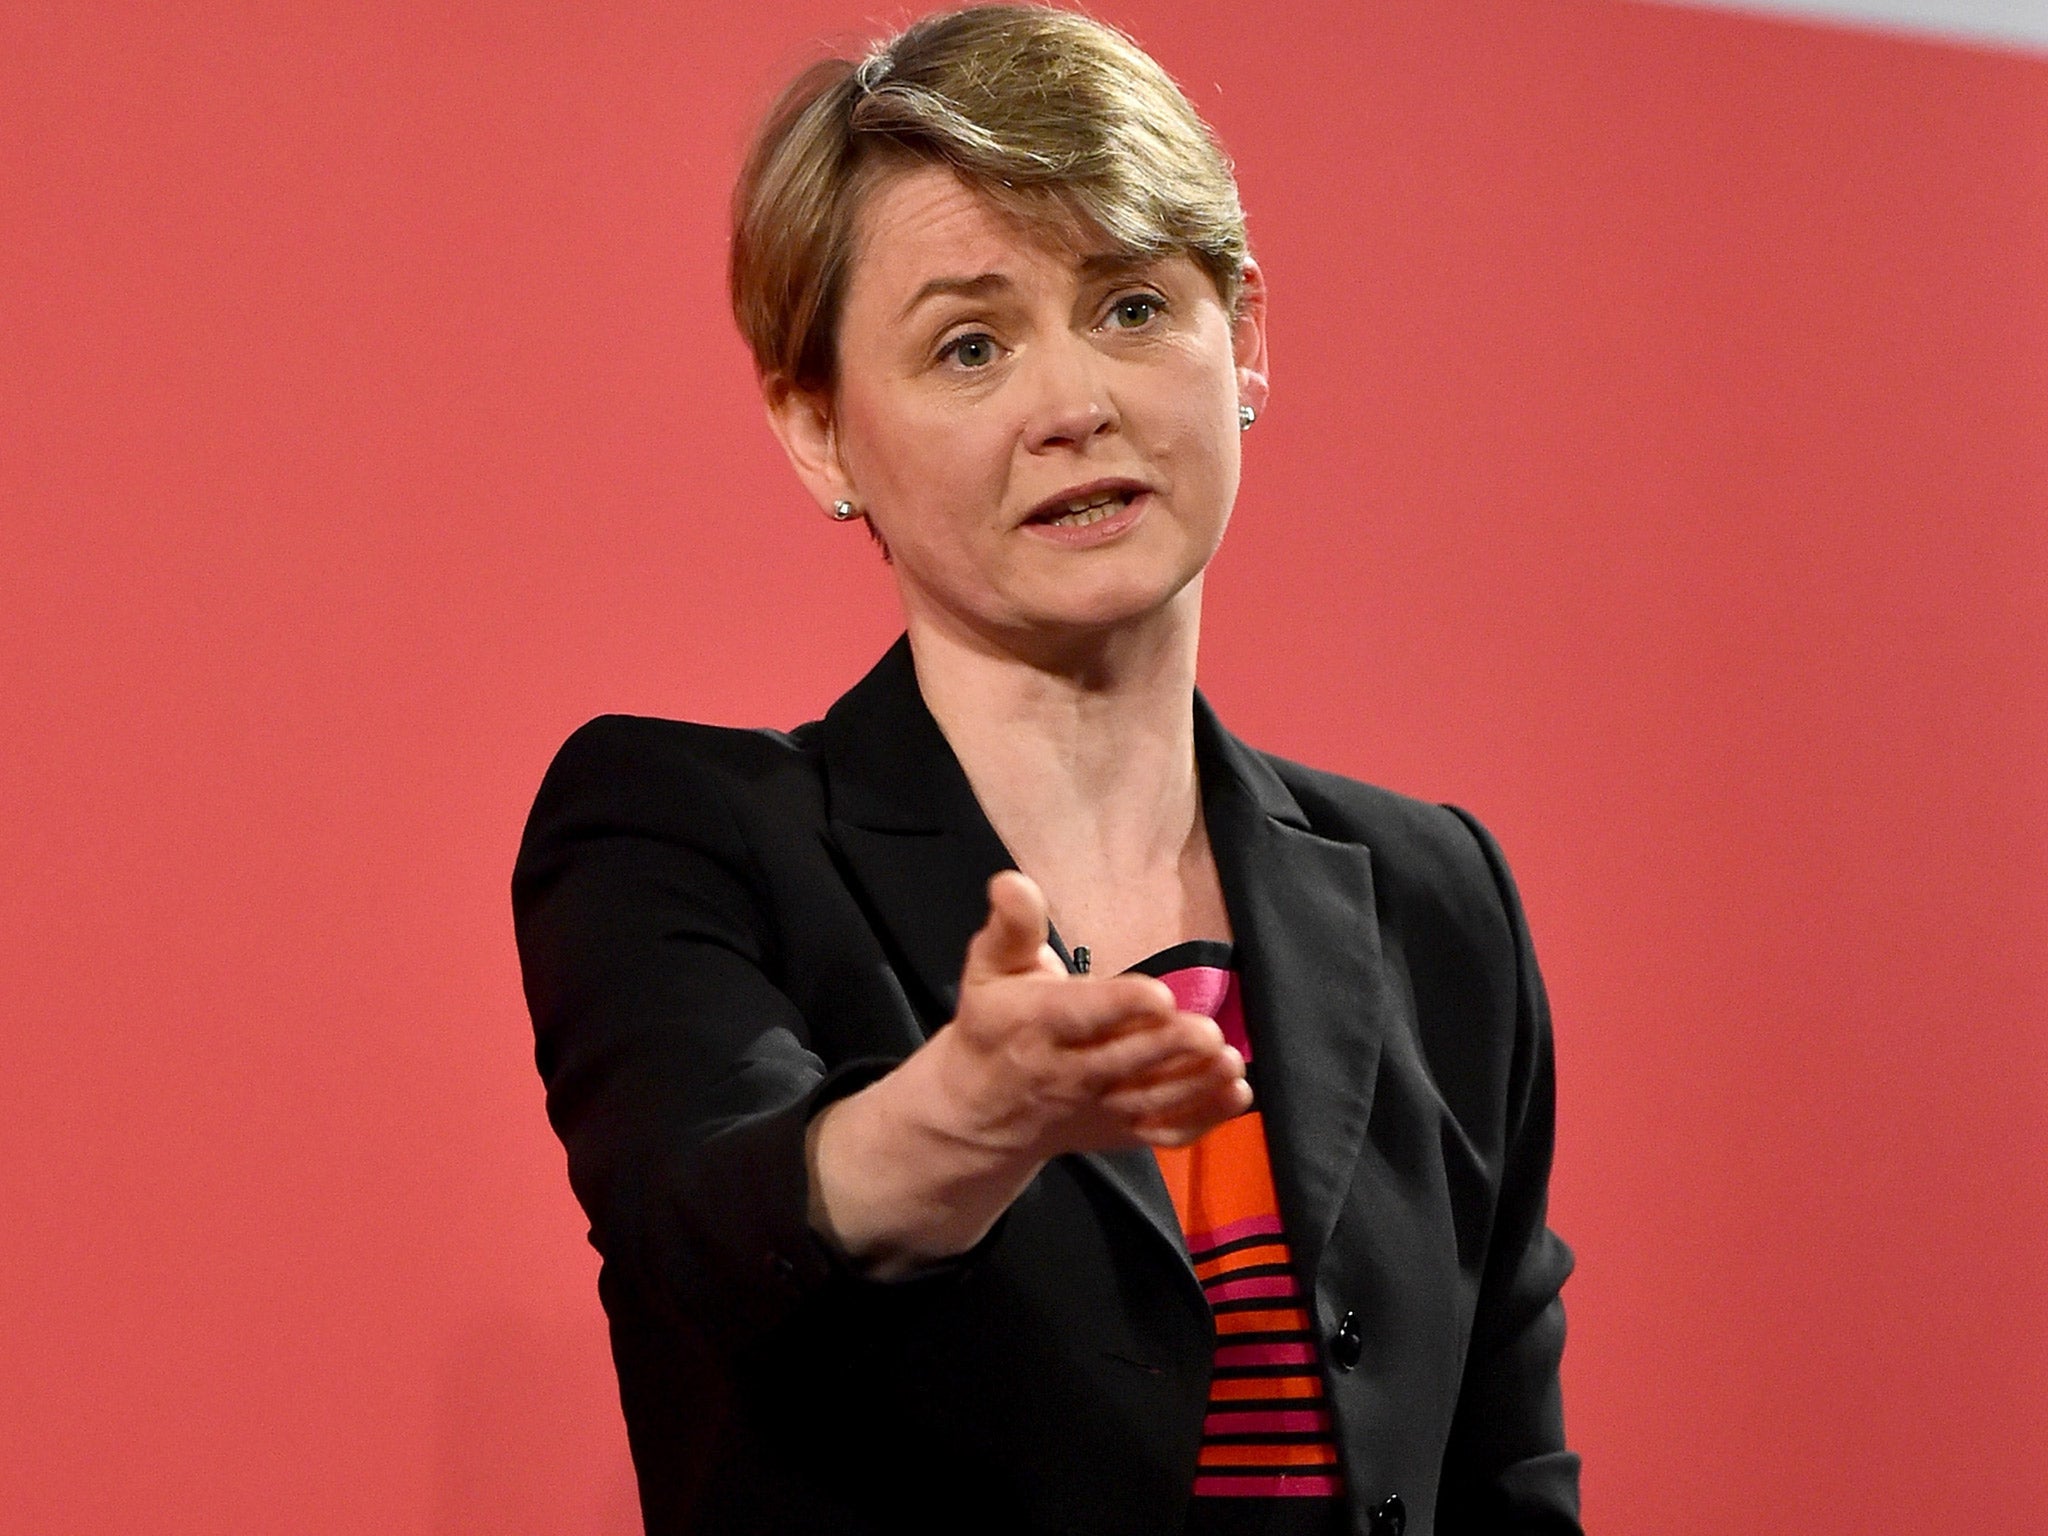 Yvette Cooper admitted there was ‘frustration and anger’ after Labour’s defeat at the election